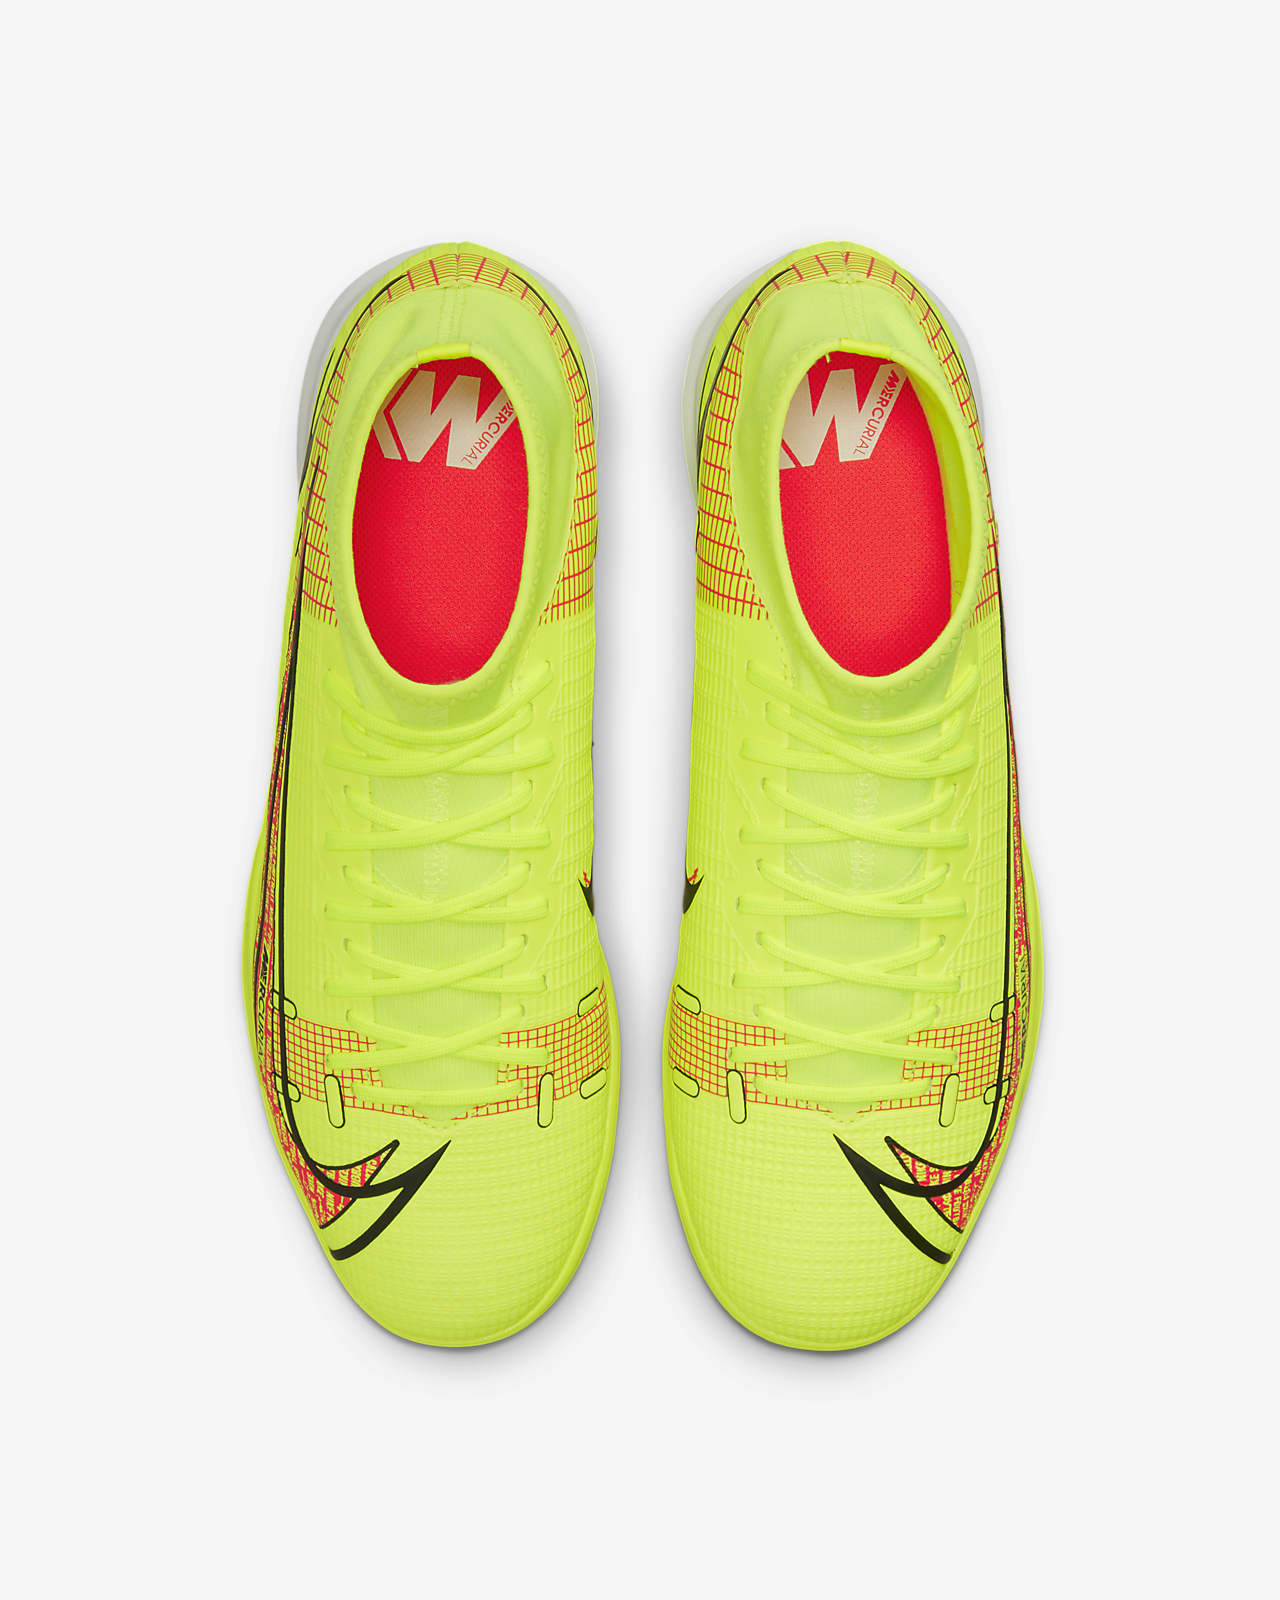 Nike Mercurial Indoor Youth Online Exclusive Offers 74 Off Www Researchcycles Com